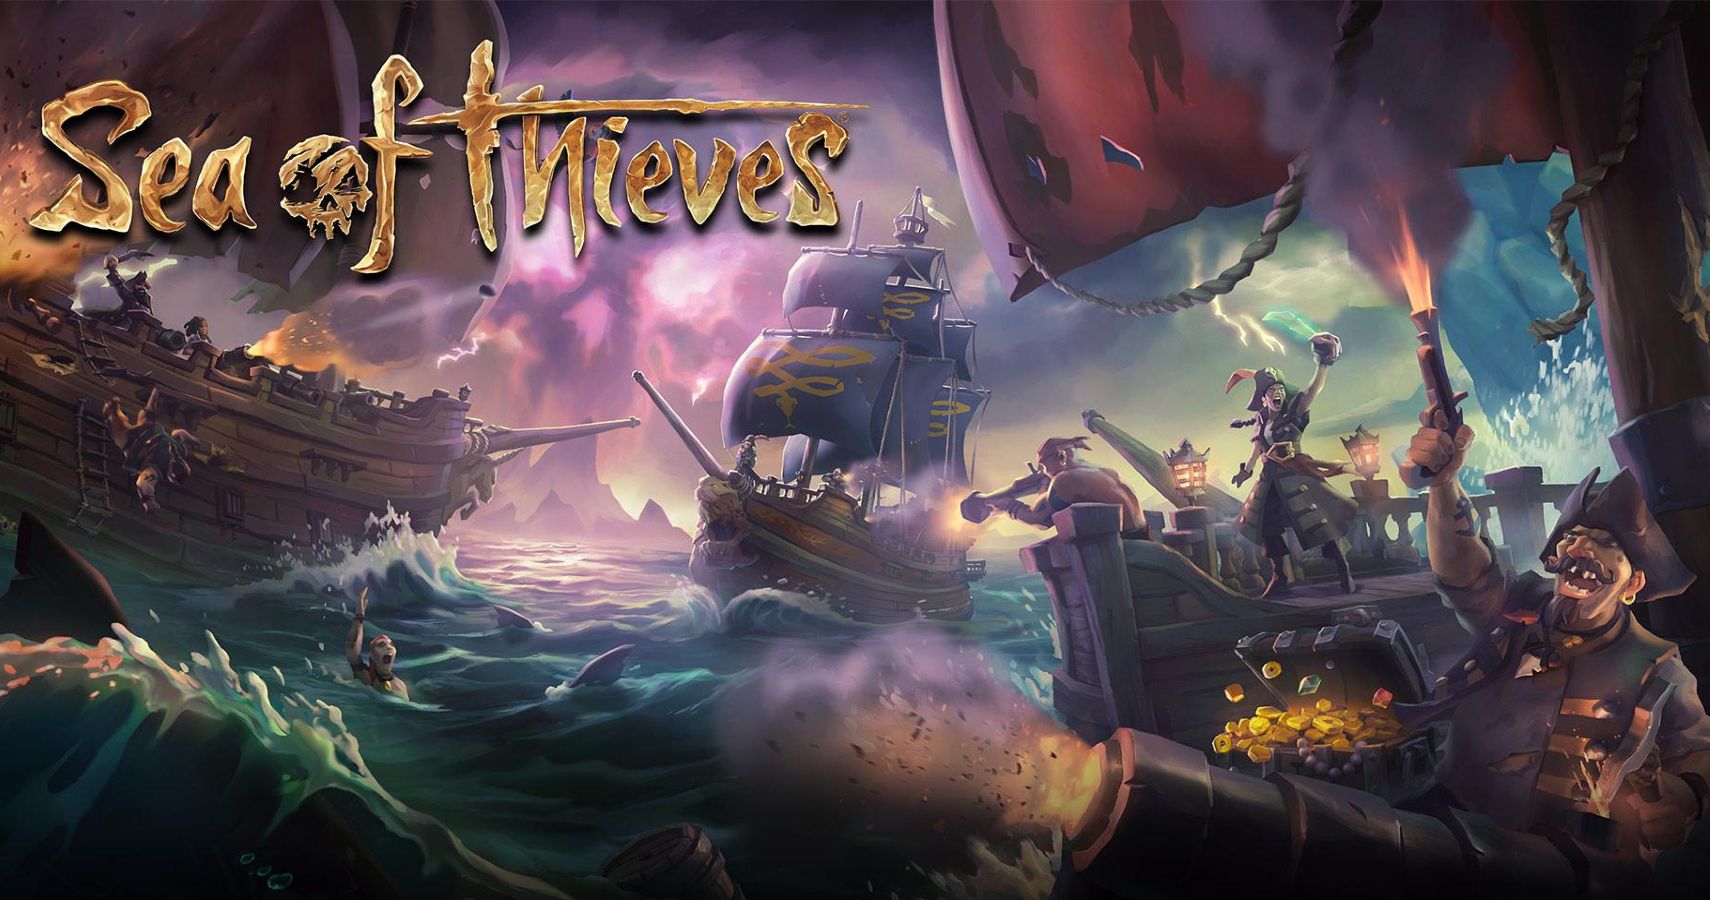 10 Million Players Have Set Sail In Sea Of Thieves